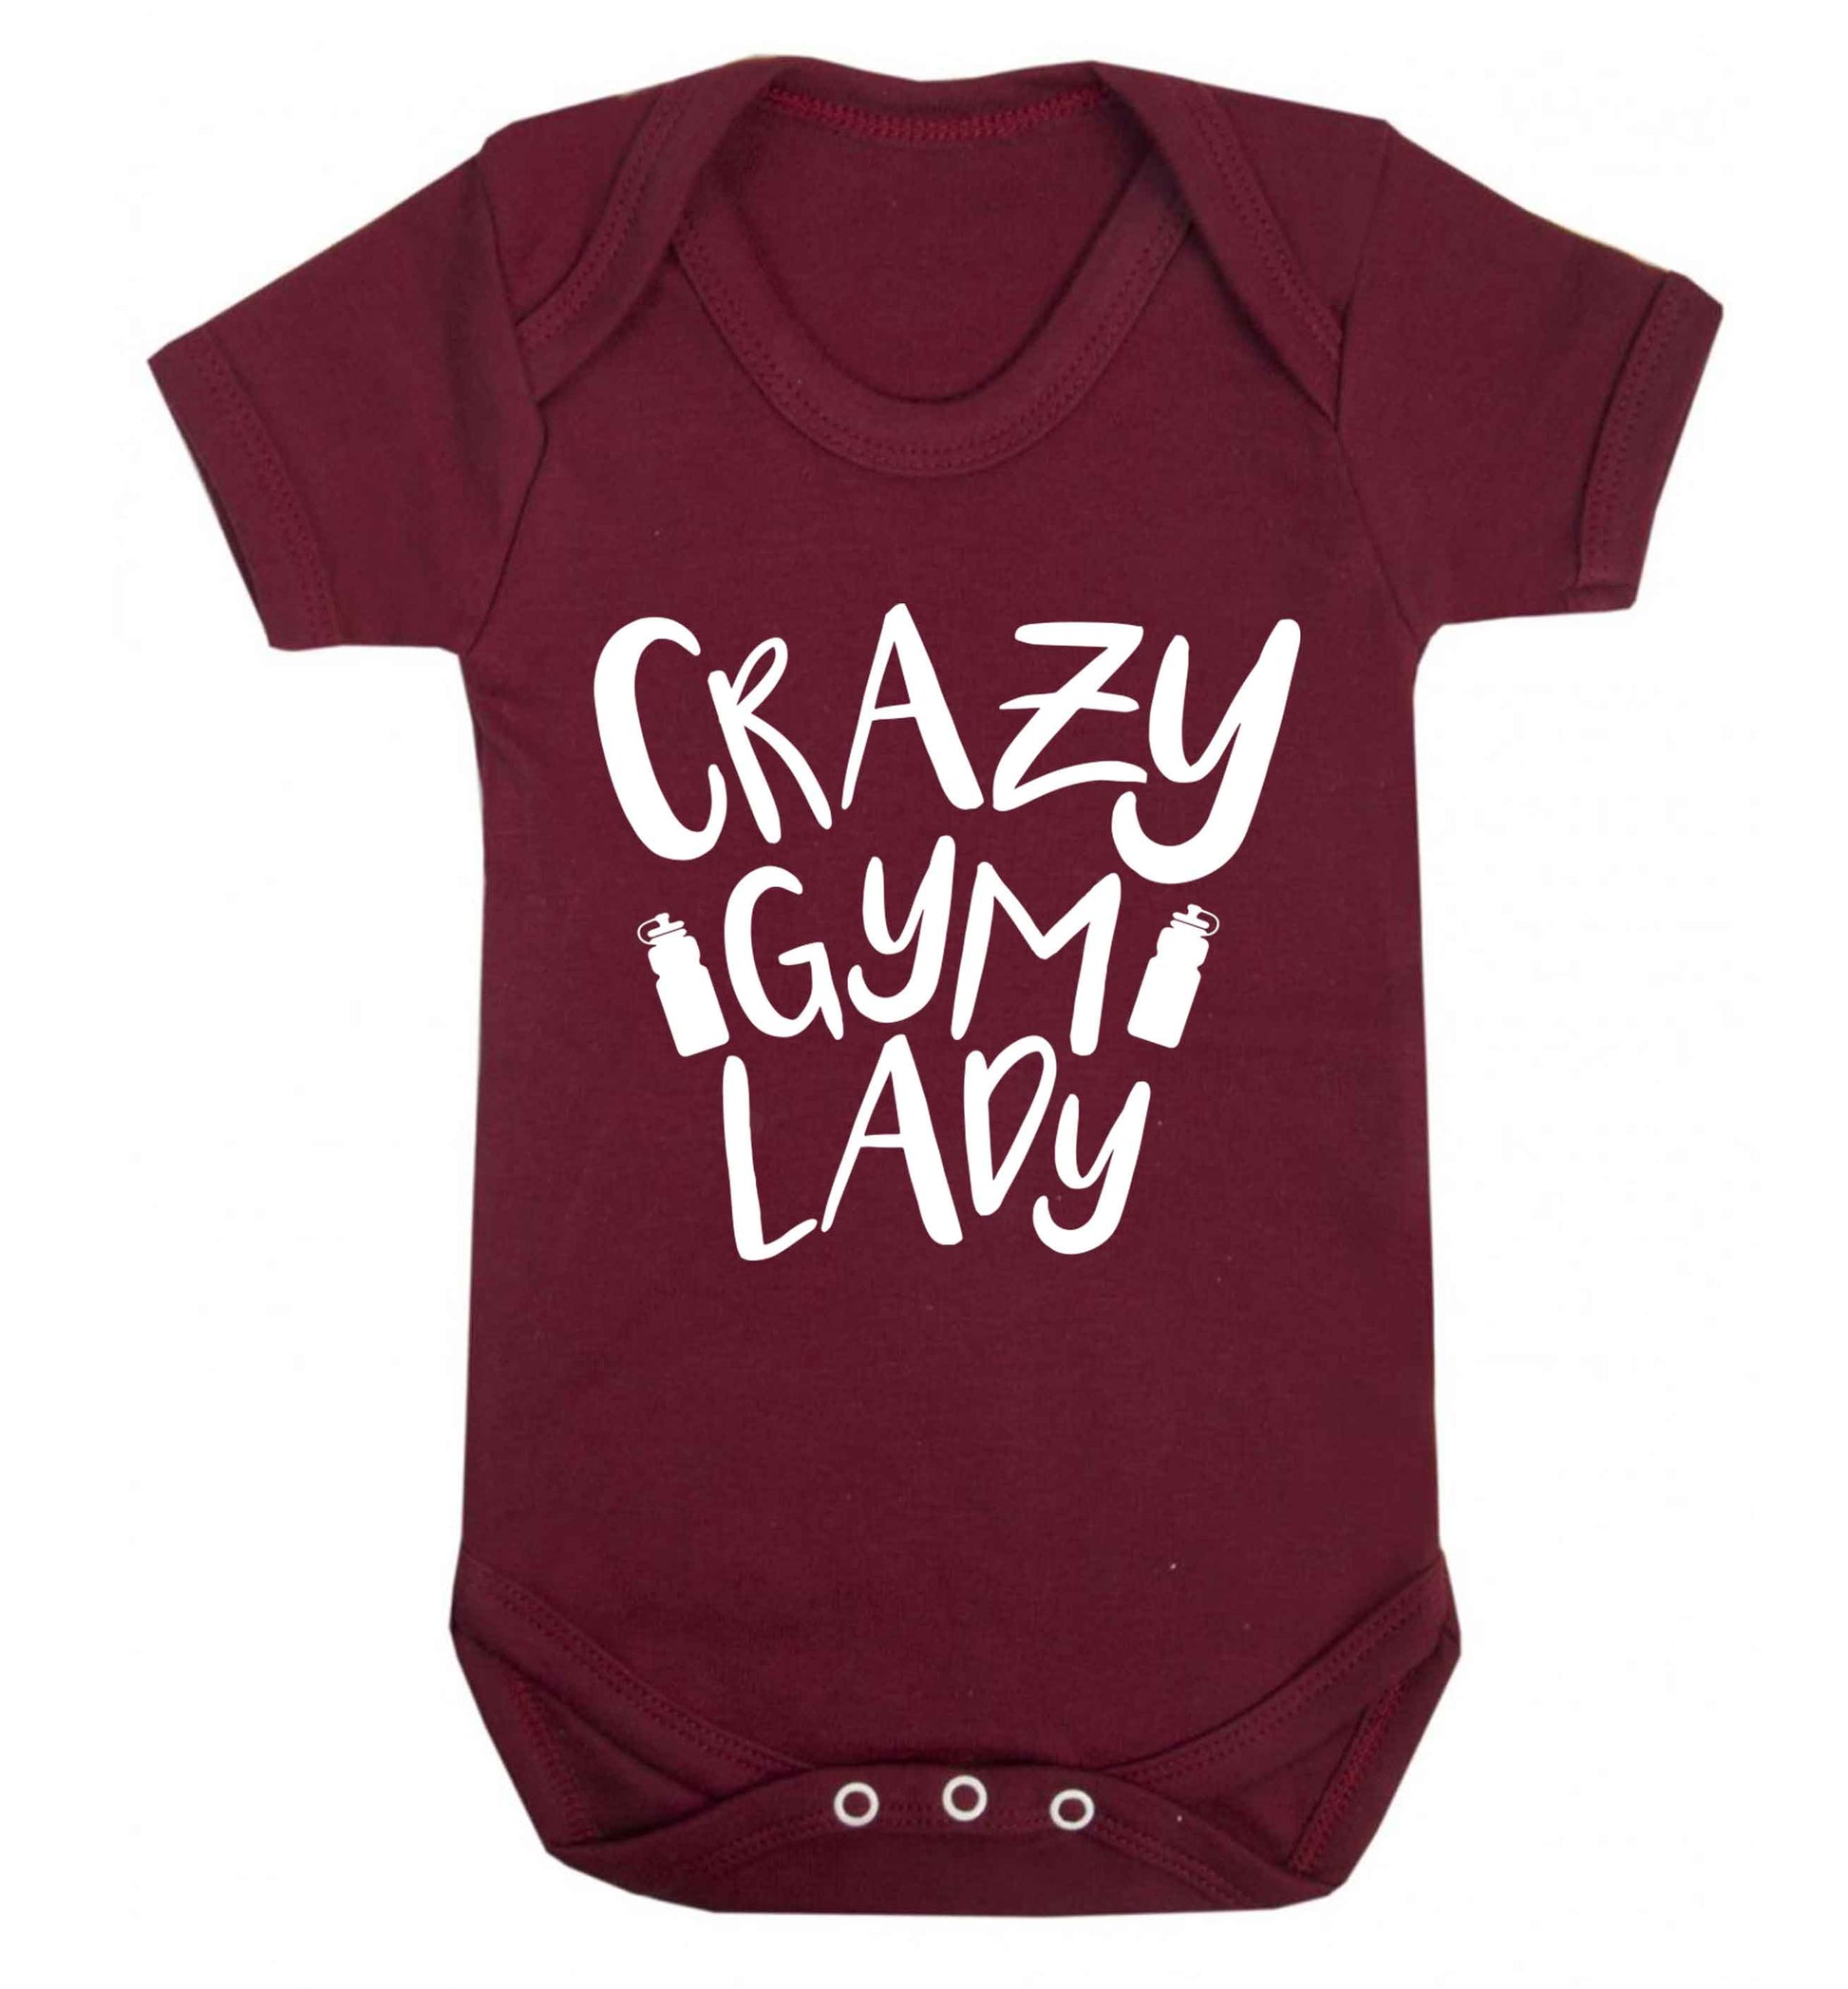 Crazy gym lady Baby Vest maroon 18-24 months